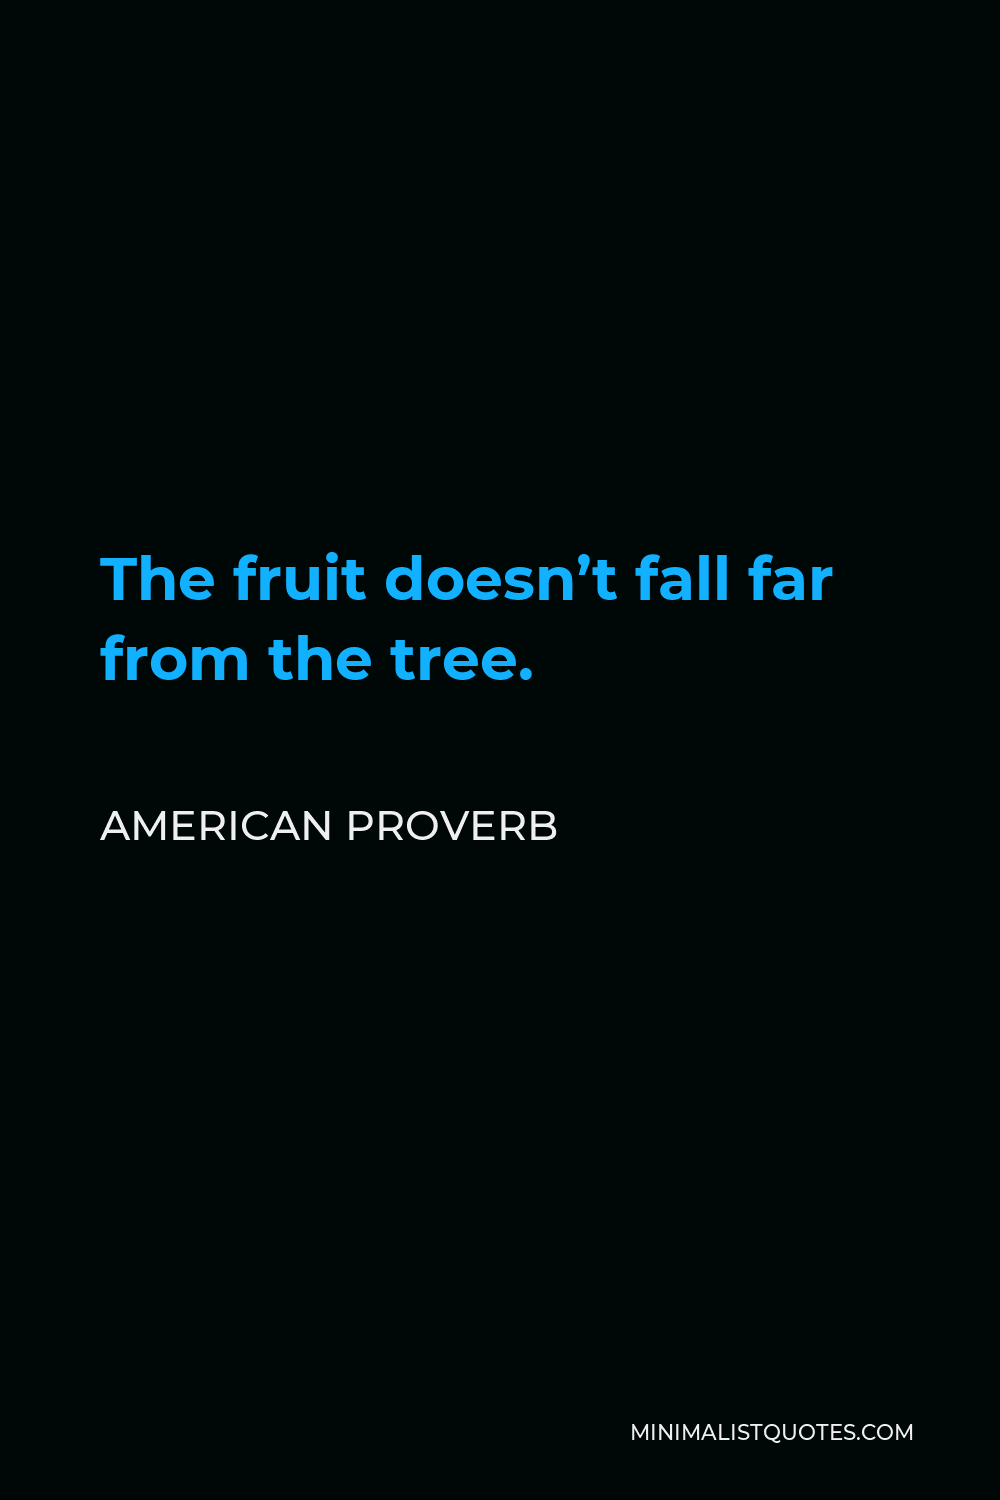 American Proverb Quote - The fruit doesn’t fall far from the tree.